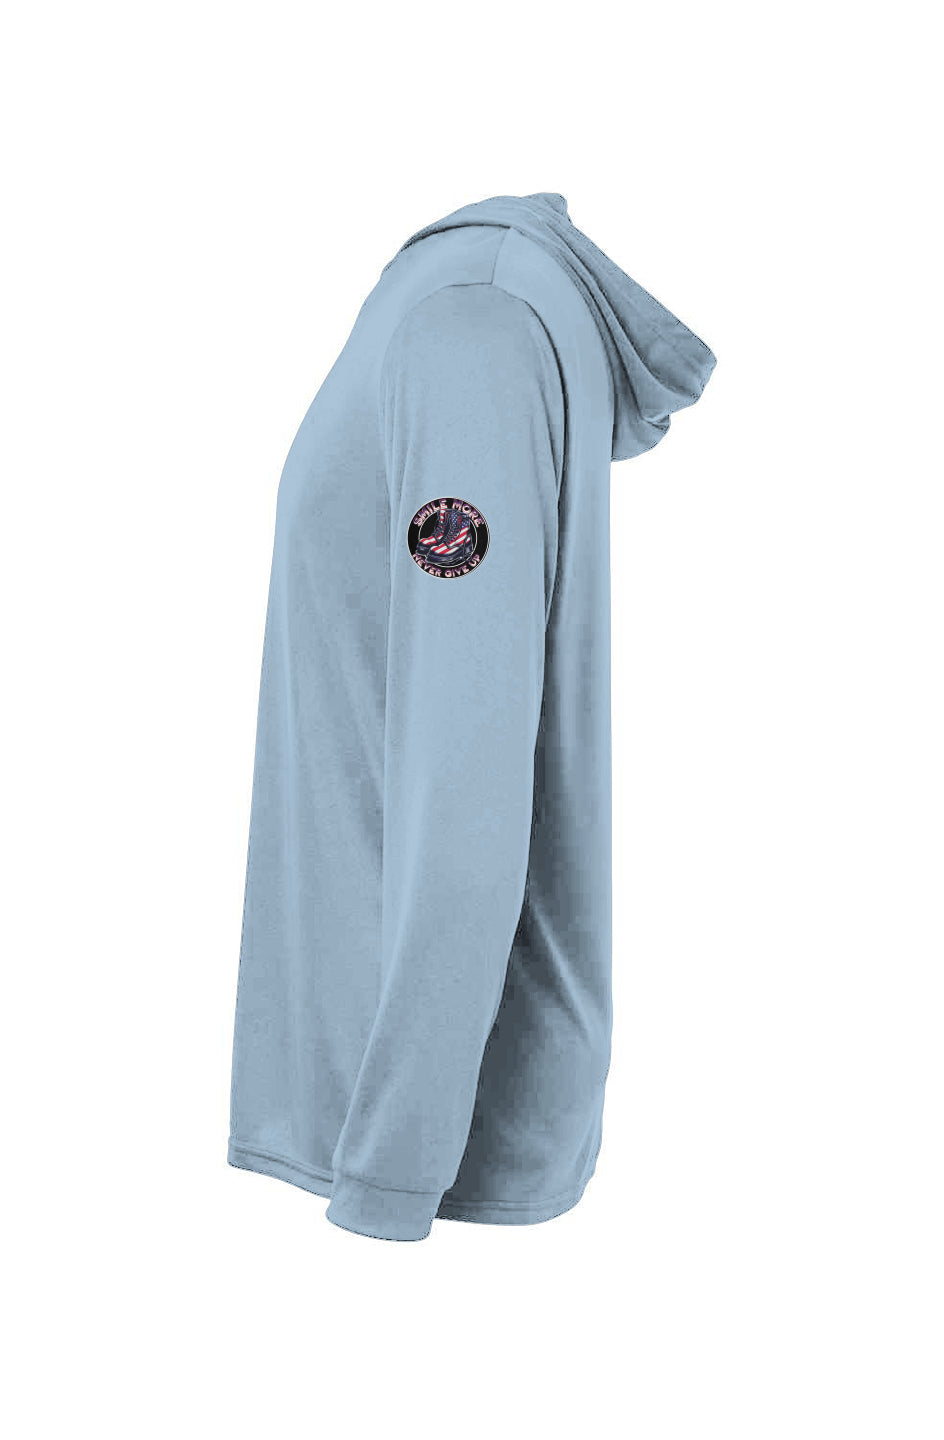 Bahama Hooded LS Upgrade your activewear collection with the Bahama Performance Hooded LS Tee. Crafted from 100% microfiber performance polyester, it seamlessly blends comfort and style. From wrinkle-resistant finesse to UPF 50 protection, this is activewear redefined for the modern adventurer.